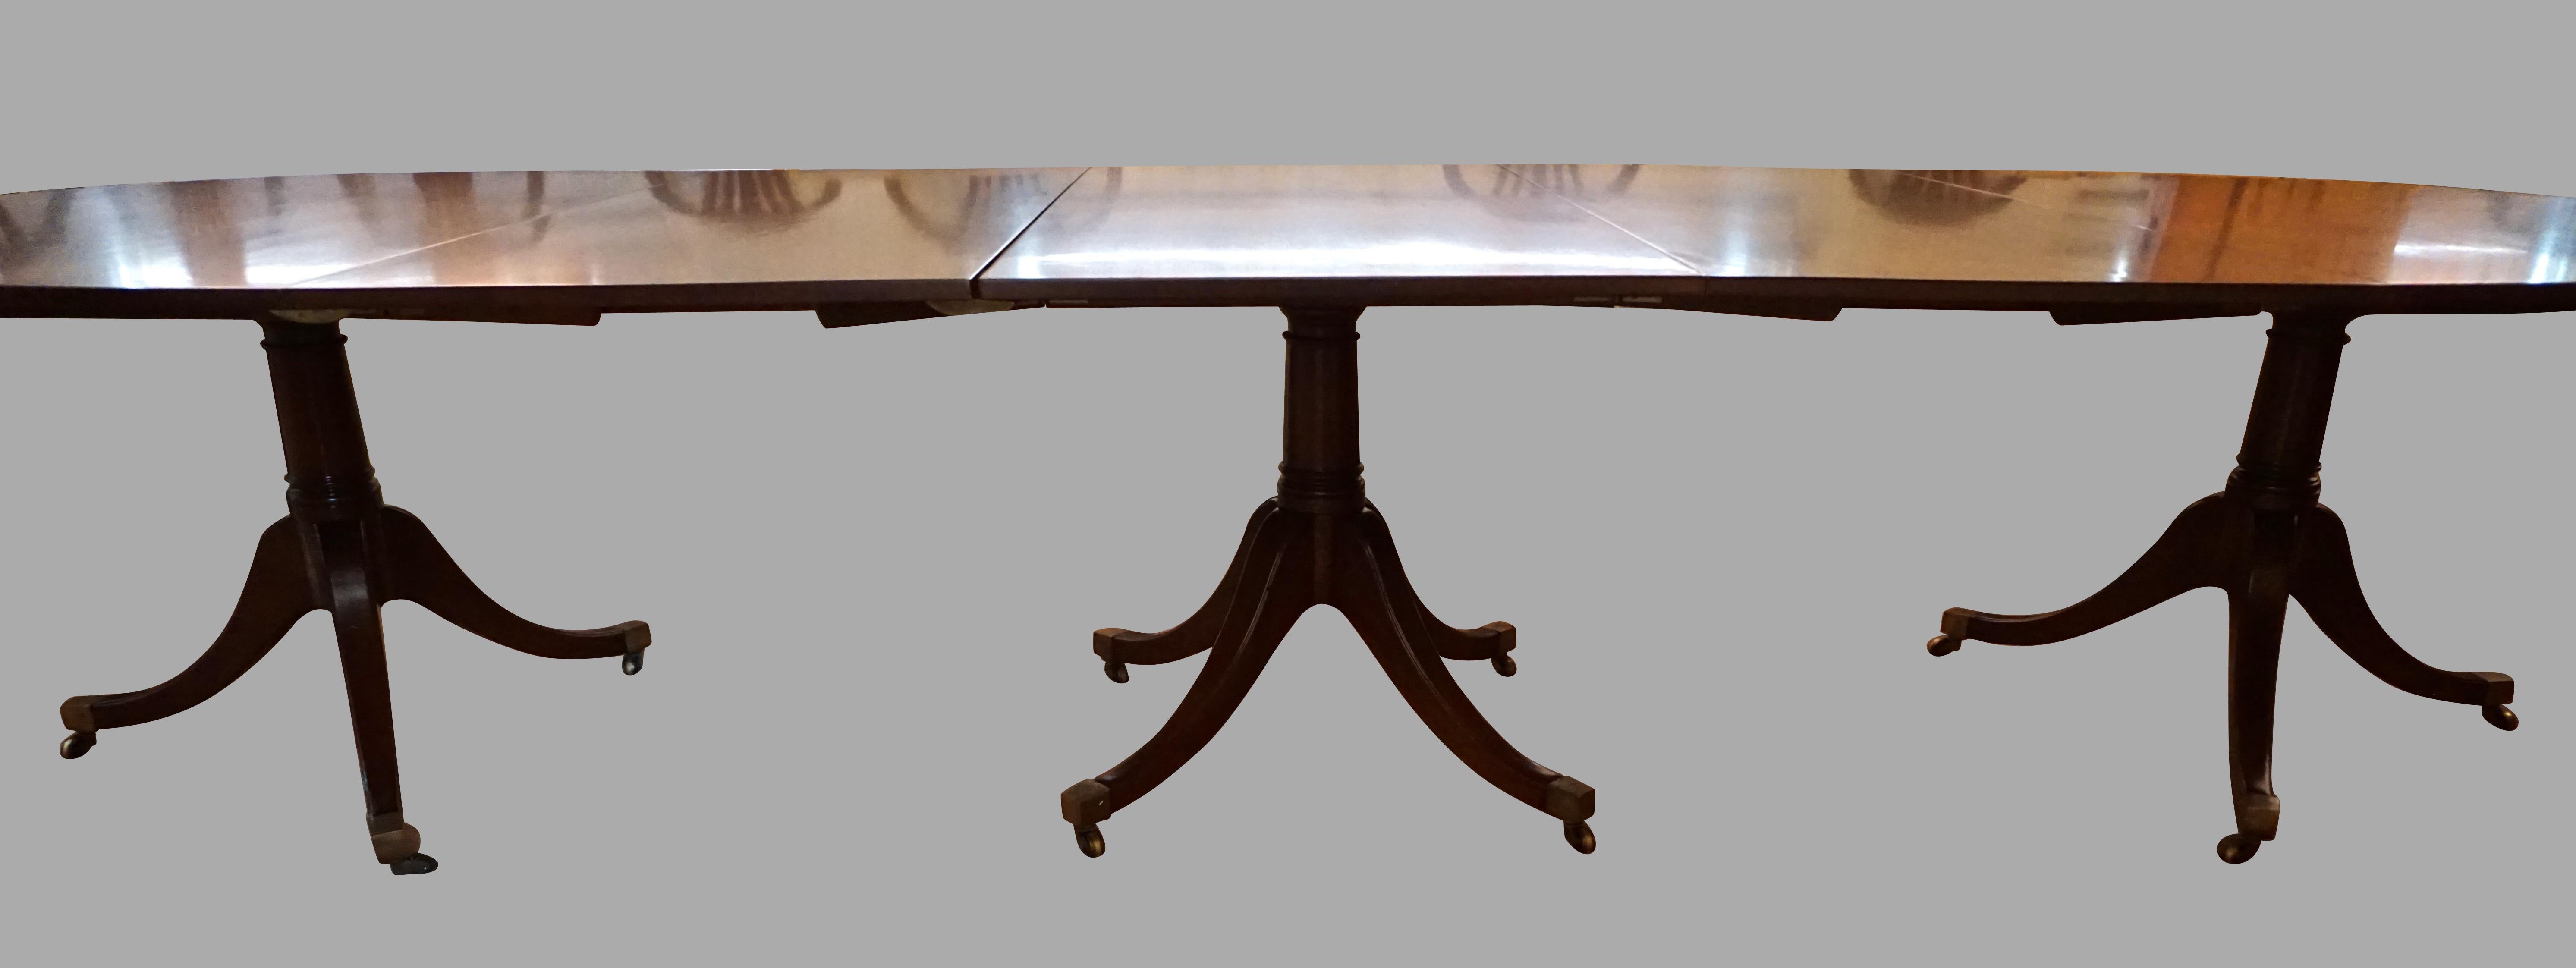 English 3 Pedestal Georgian Style Dining Table with 2 Original Leaves 4